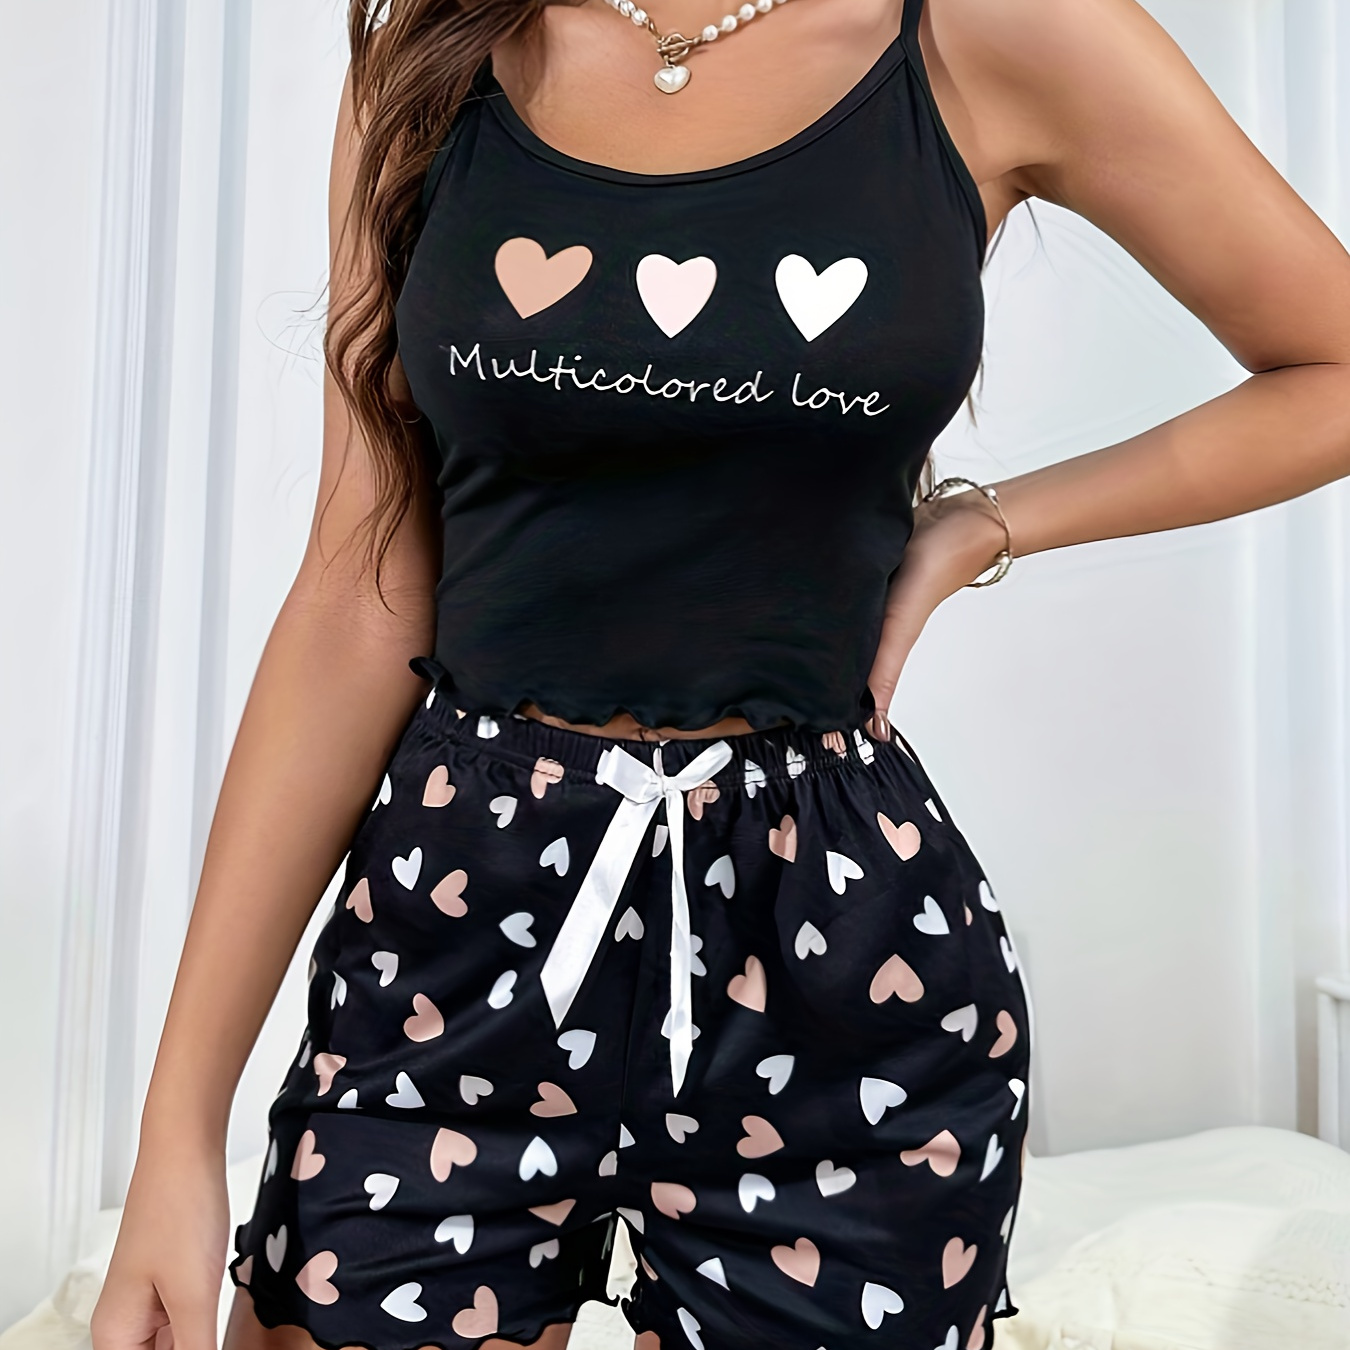 

Women's Heart & Letter Print Frill Trim Casual Pajama Set, Round Neck Backless Crop Cami Top & Shorts, Comfortable Relaxed Fit, Summer Nightwear